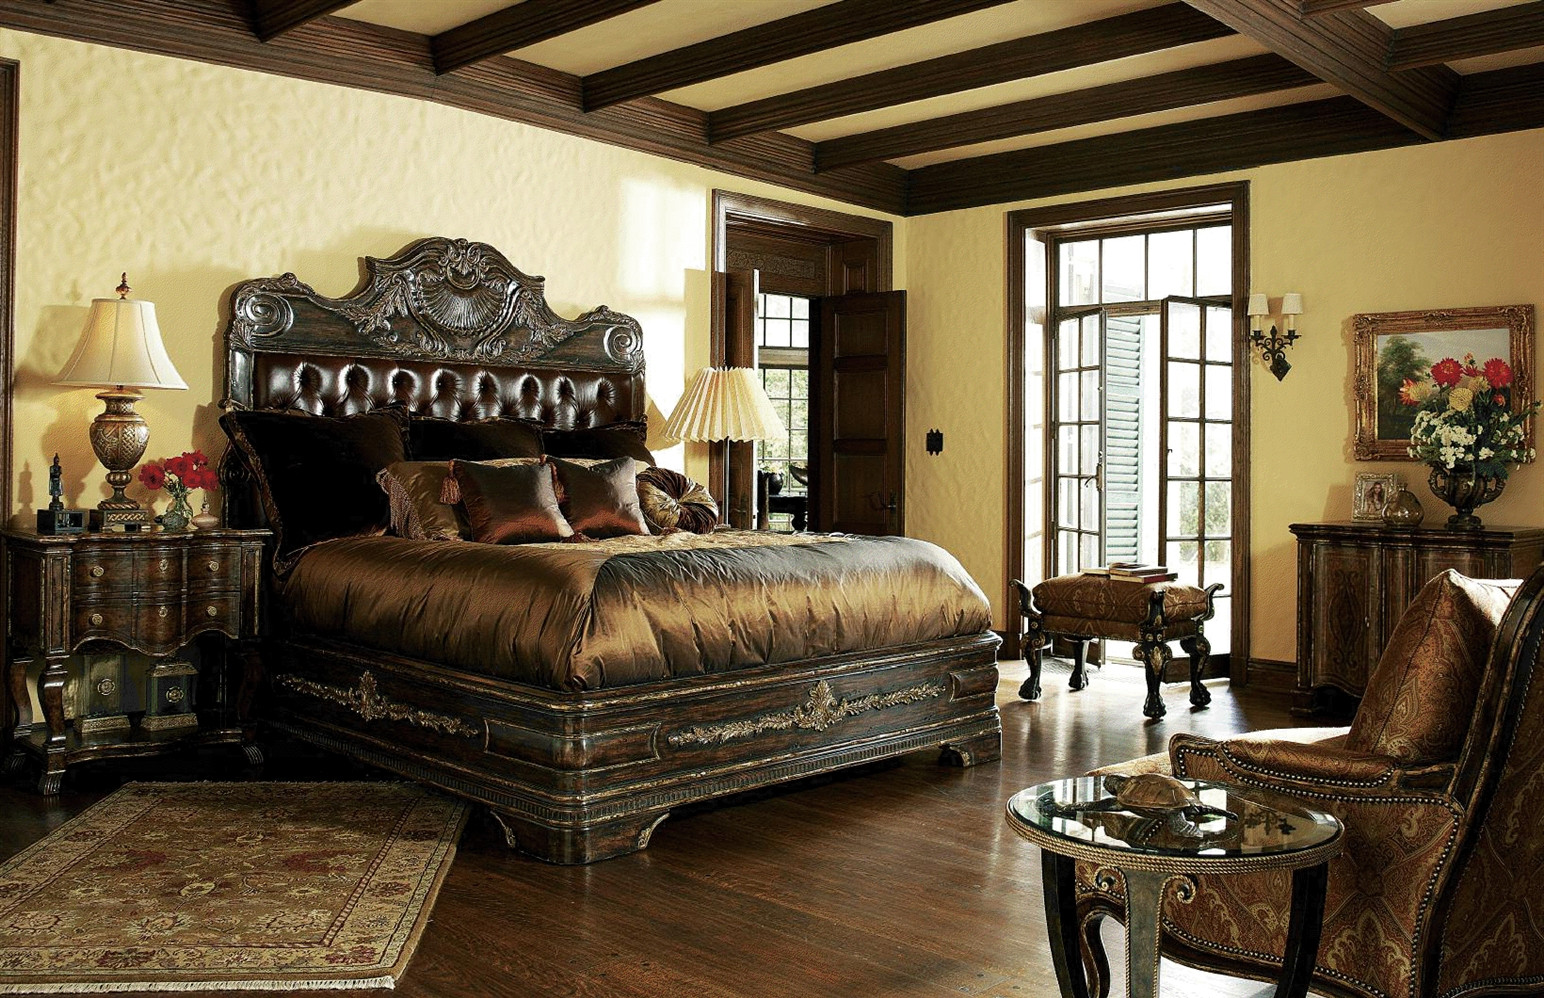 Luxury Master Bedroom Furniture
 1 High end master bedroom set carvings and tufted leather